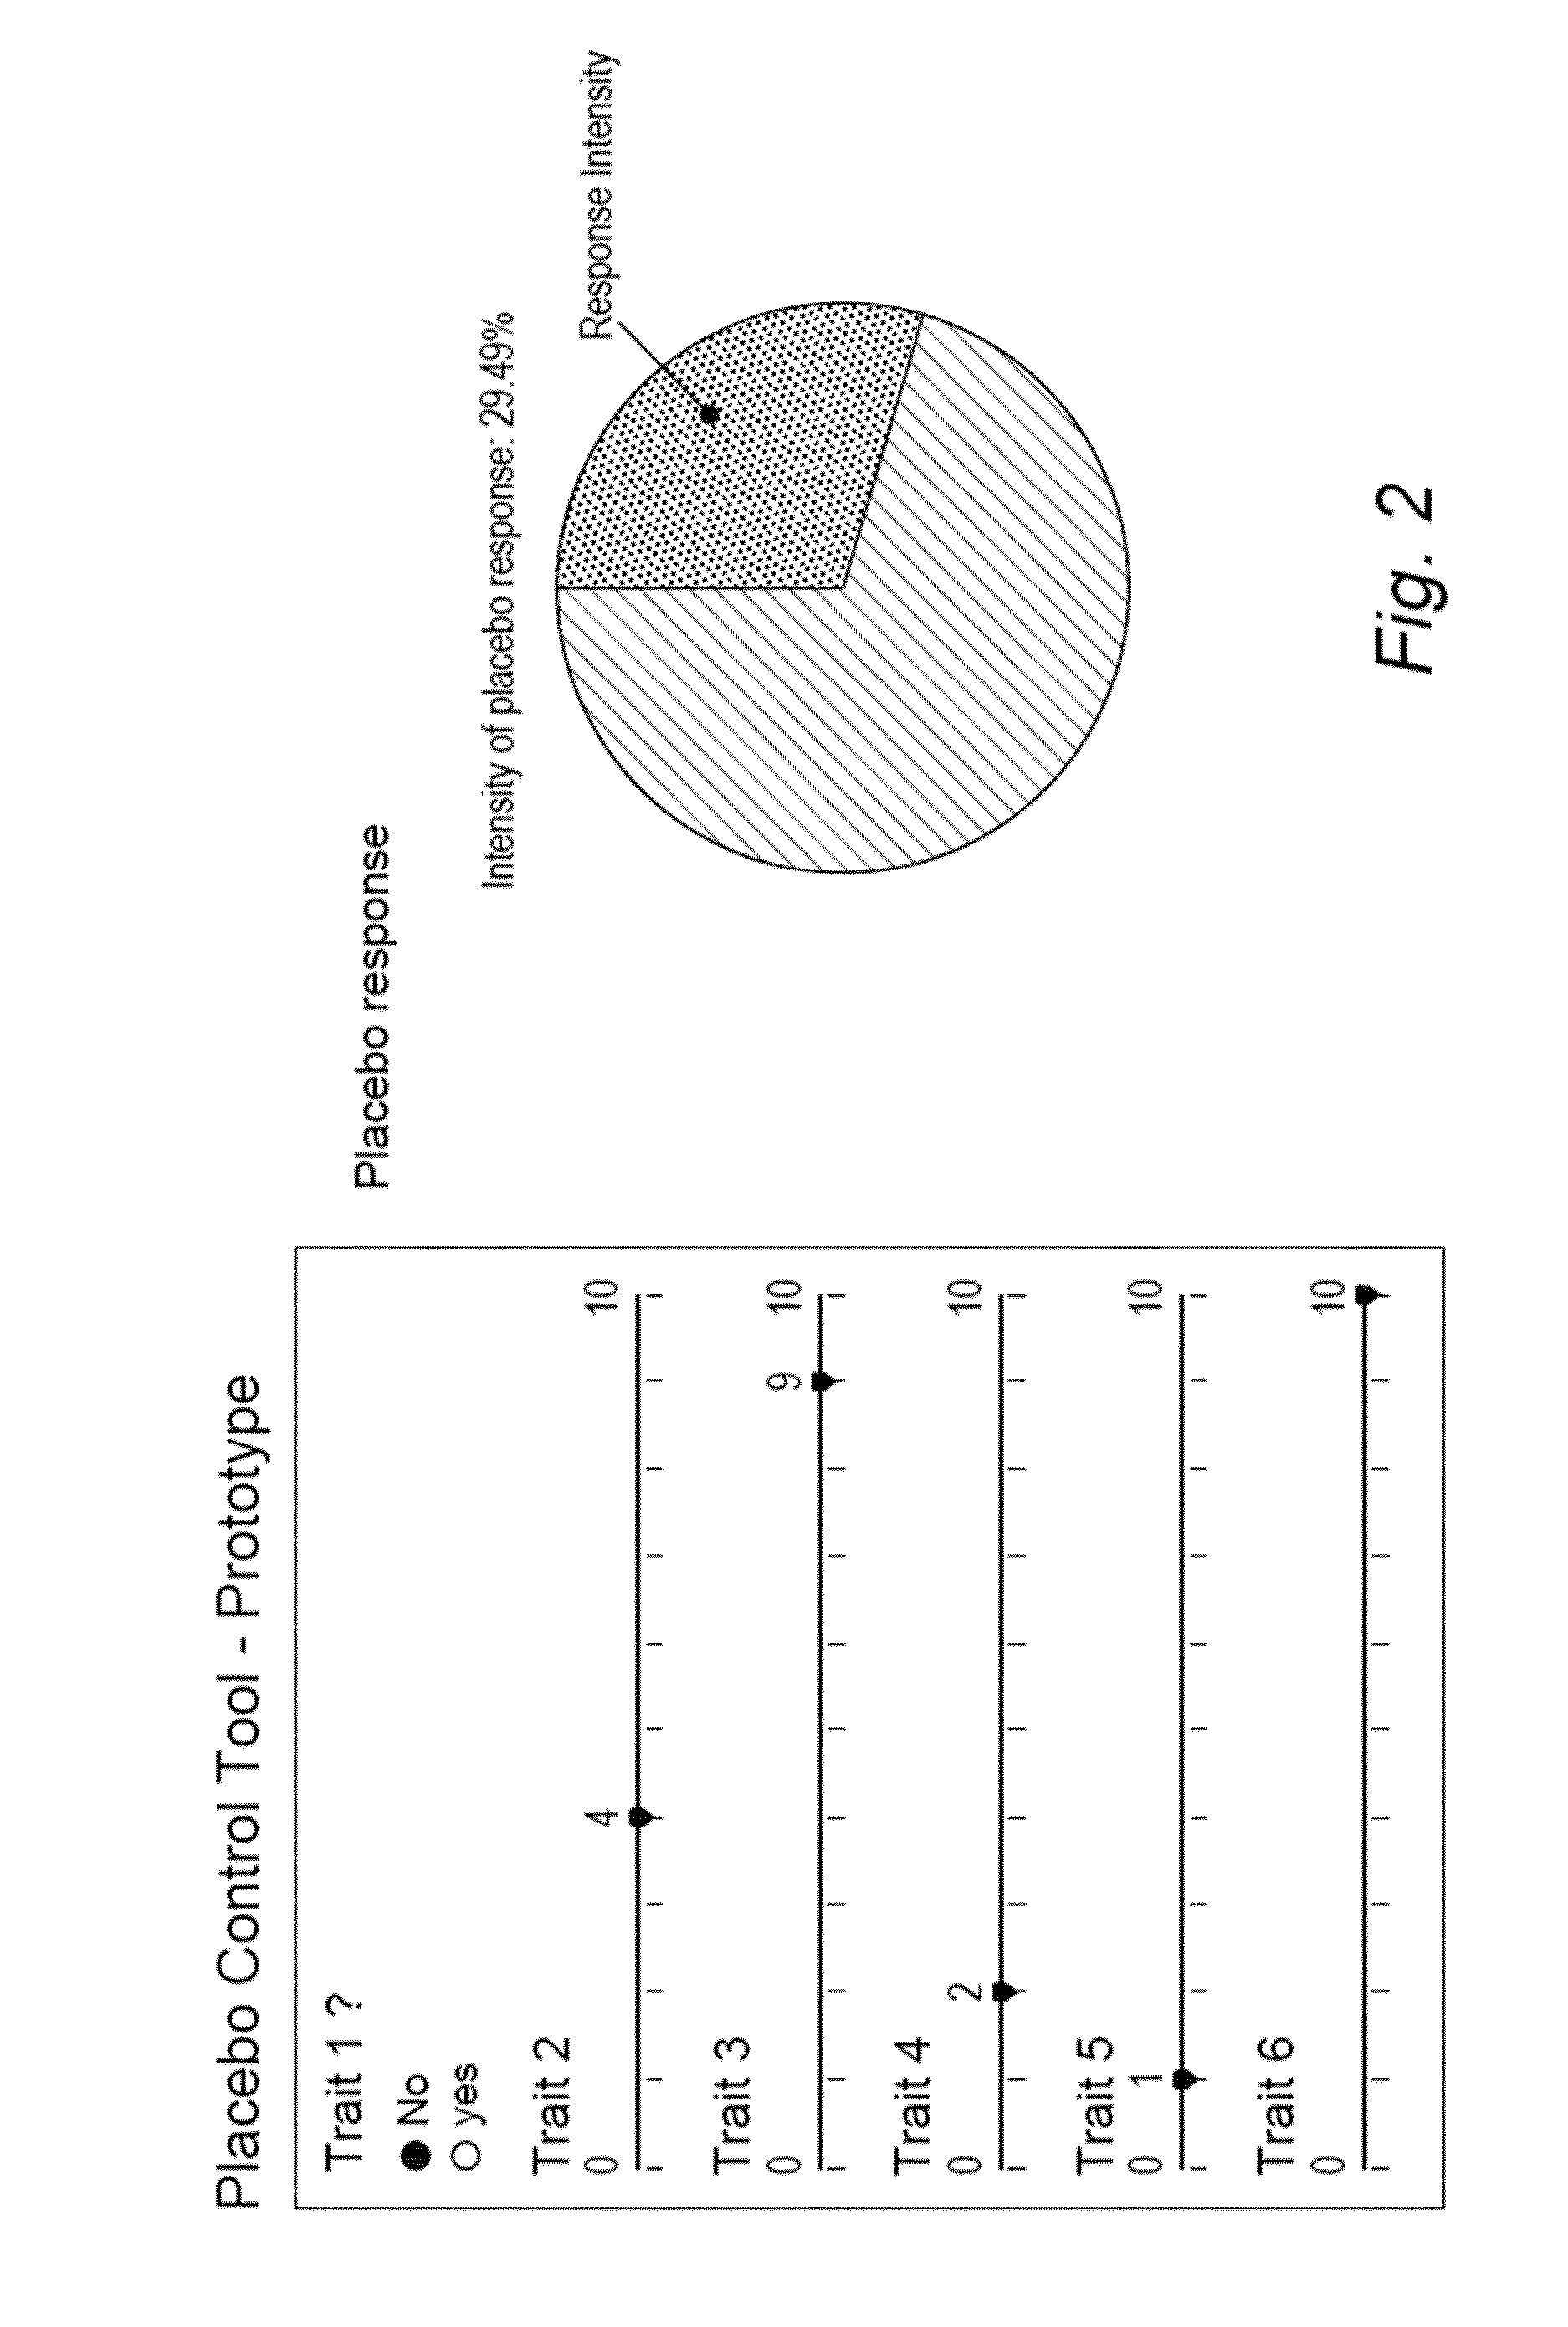 Method for prediction of a placebo response in an individual